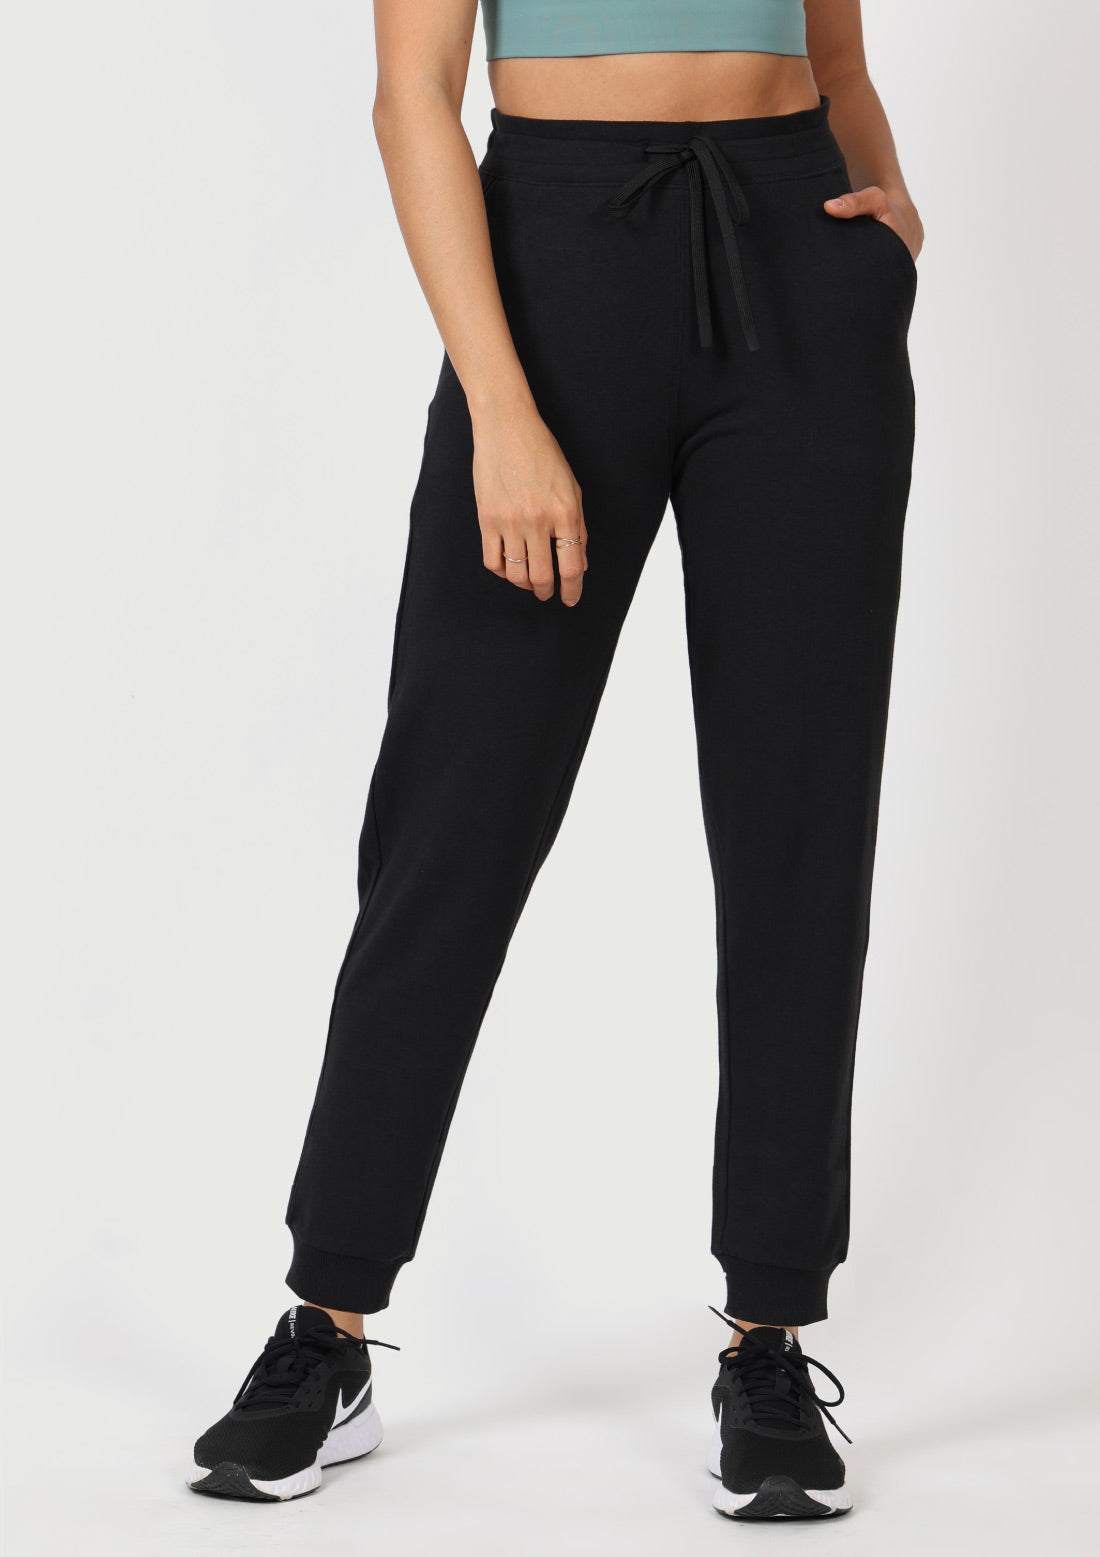 Buy Cotton Joggers for Women Online from Blissclub